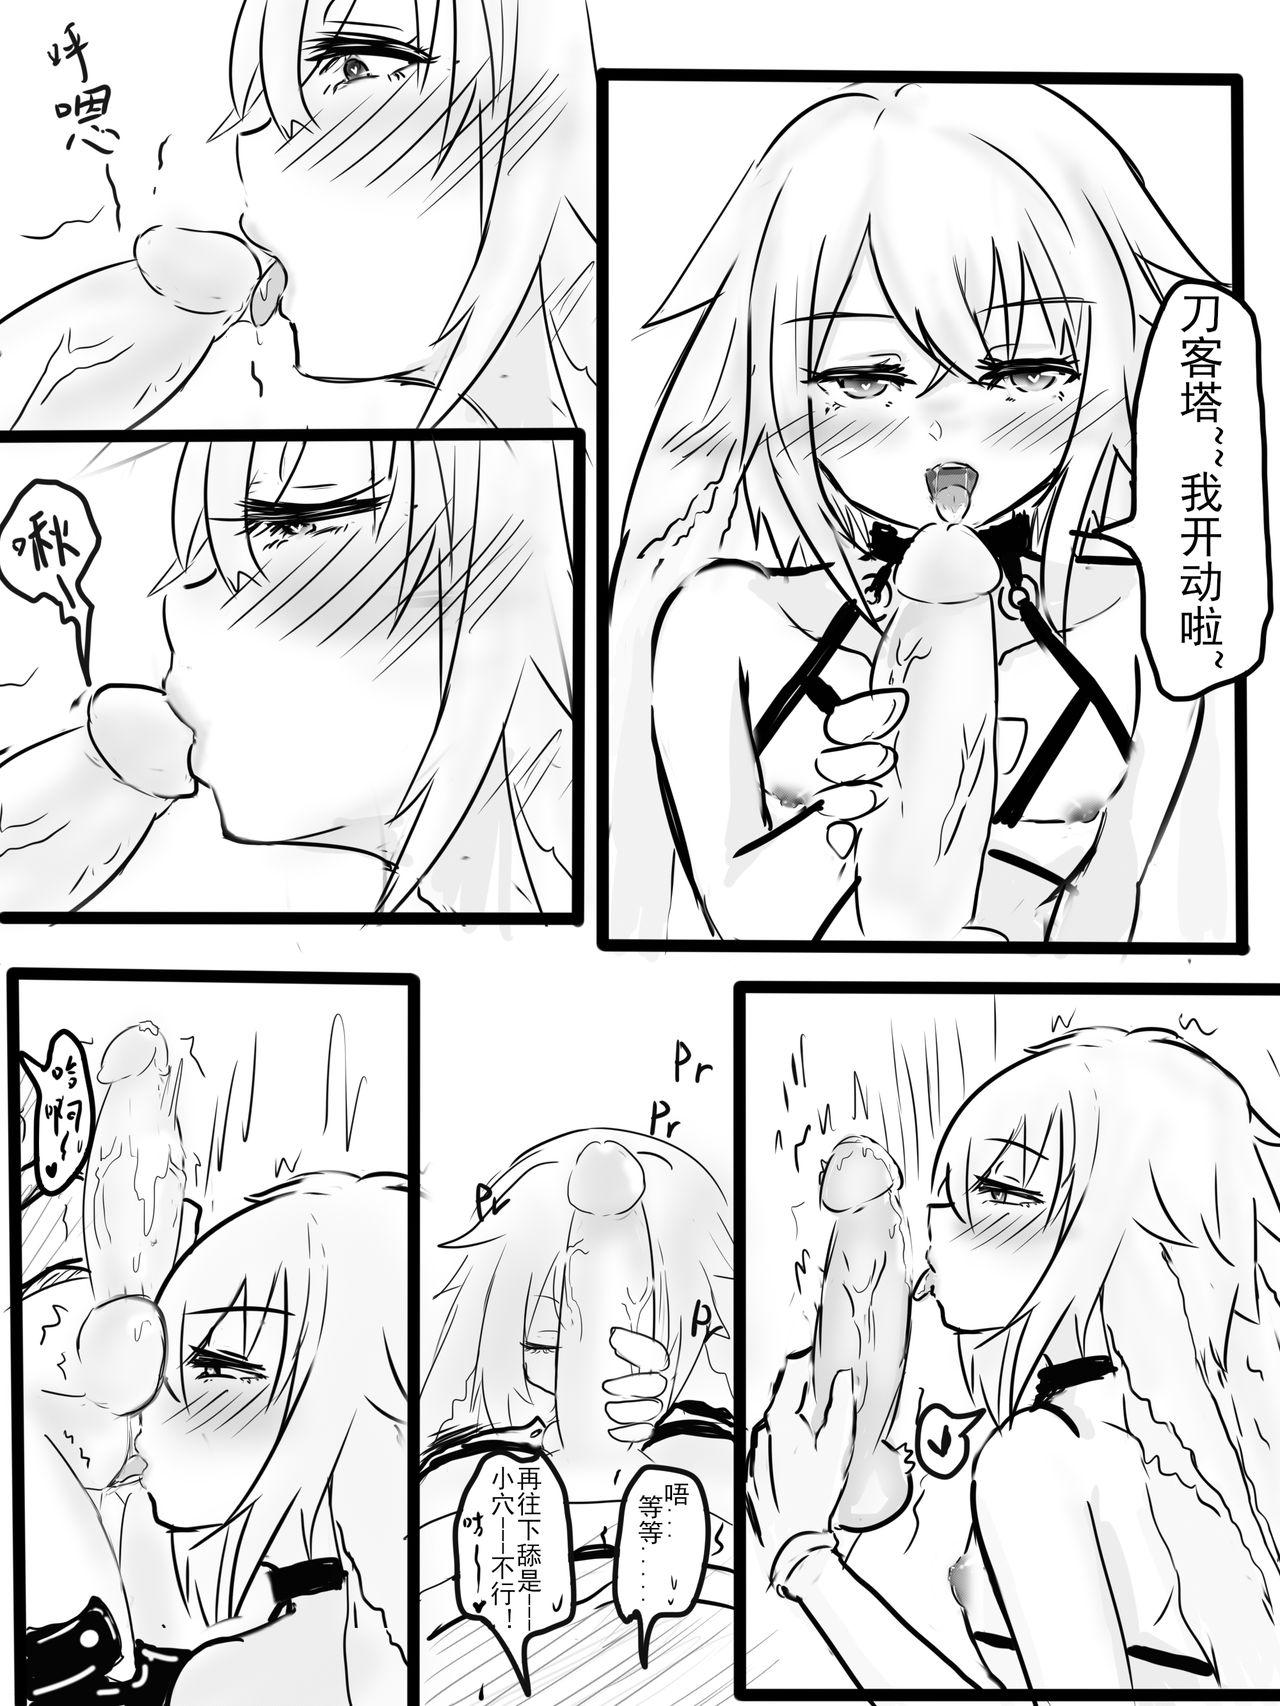 Wet Pussy 安赛尔的特别服务1 - Arknights Man - Page 6